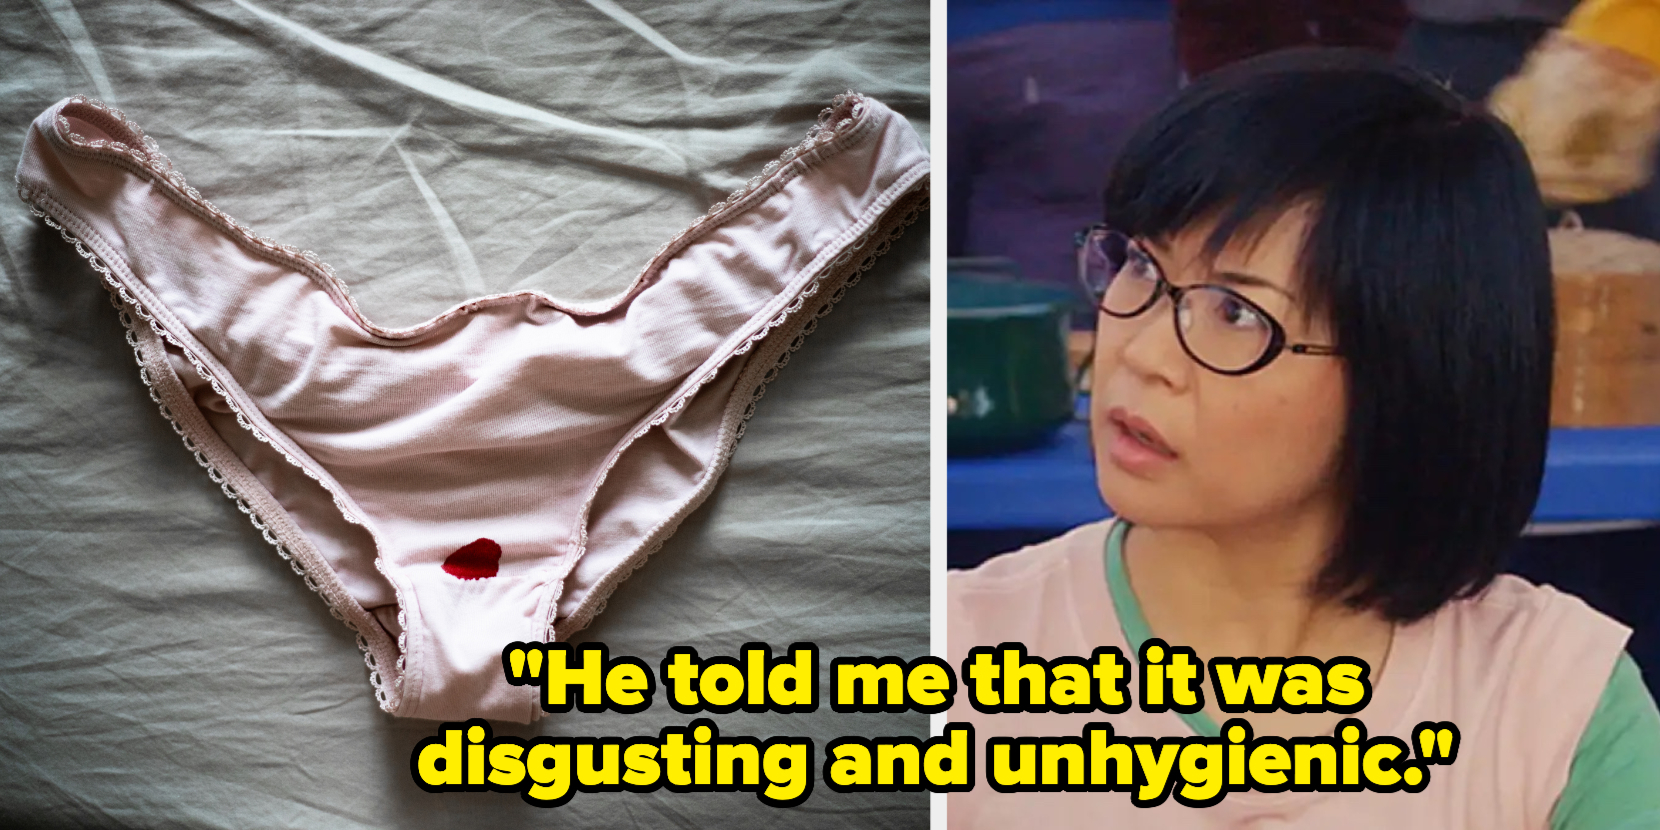 My boyfriend shamed me over my period panties and I'm so